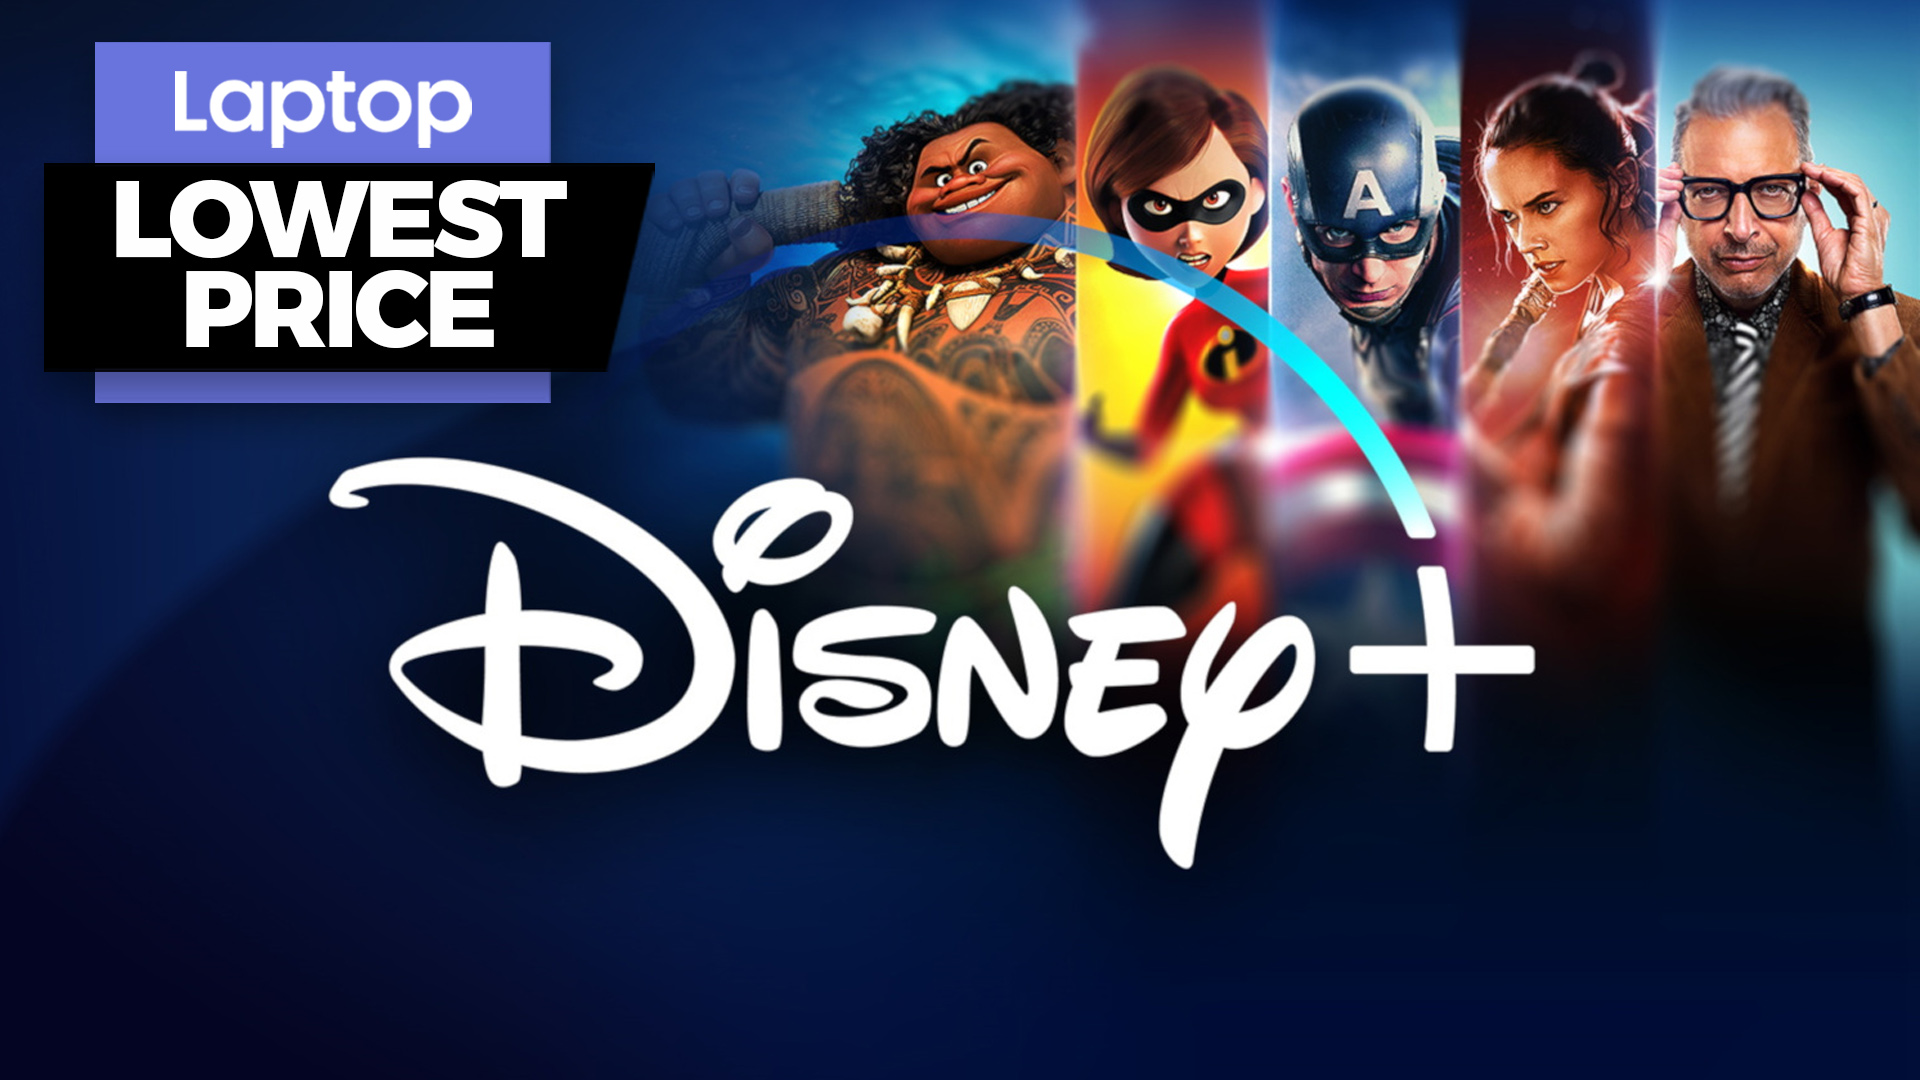 You can get a month of Disney Plus for its lowest ever price — Just 1.